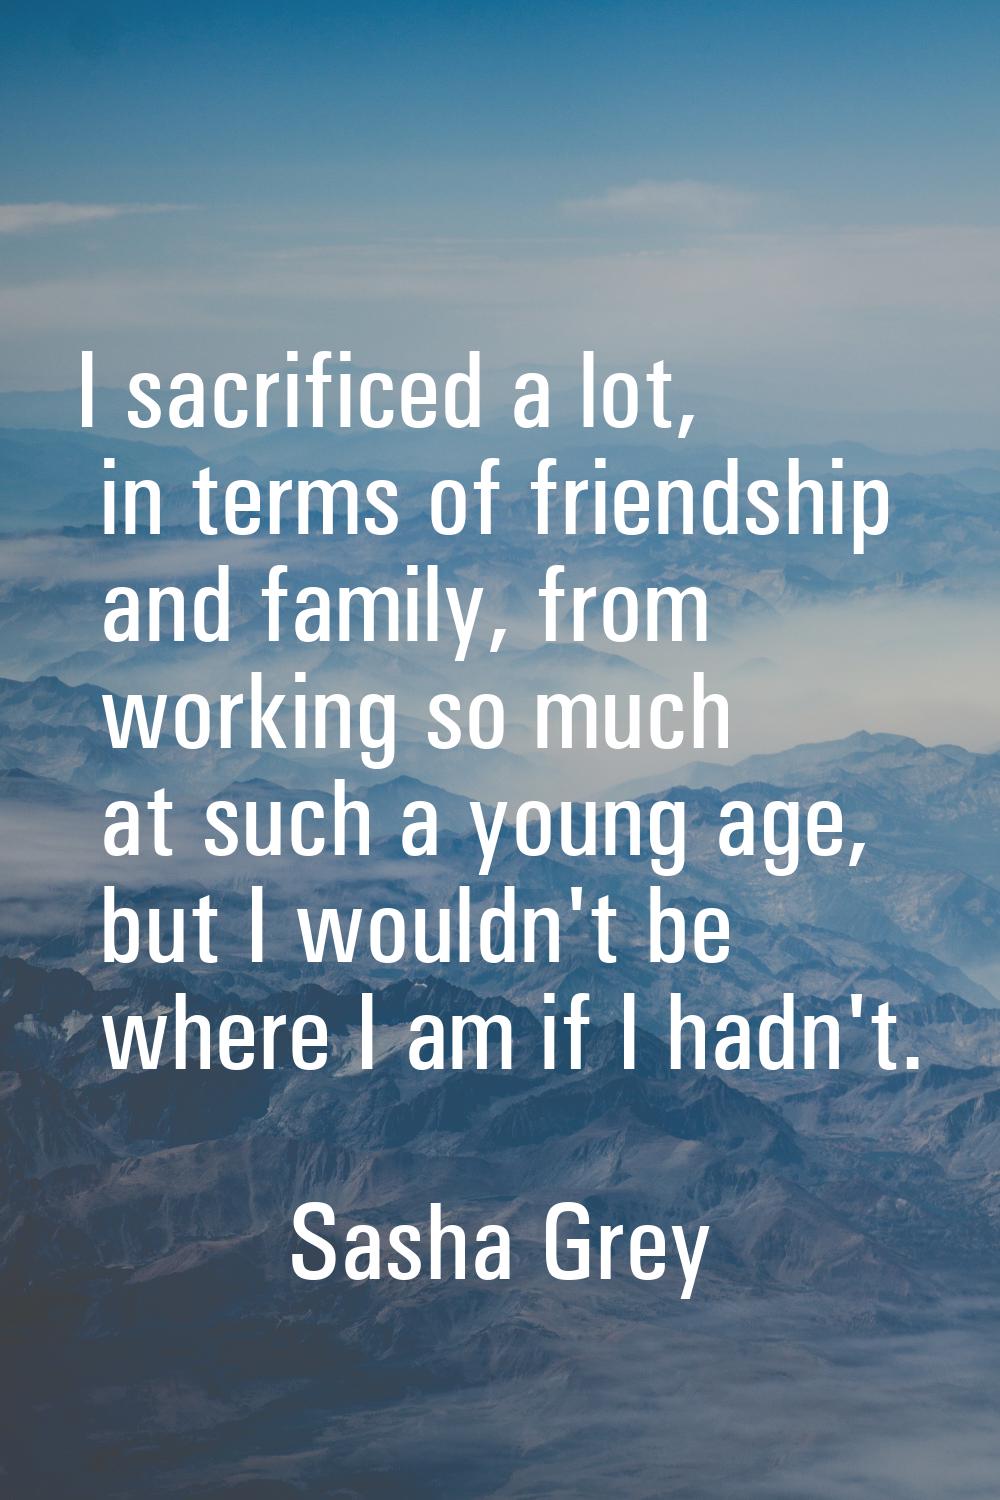 I sacrificed a lot, in terms of friendship and family, from working so much at such a young age, bu